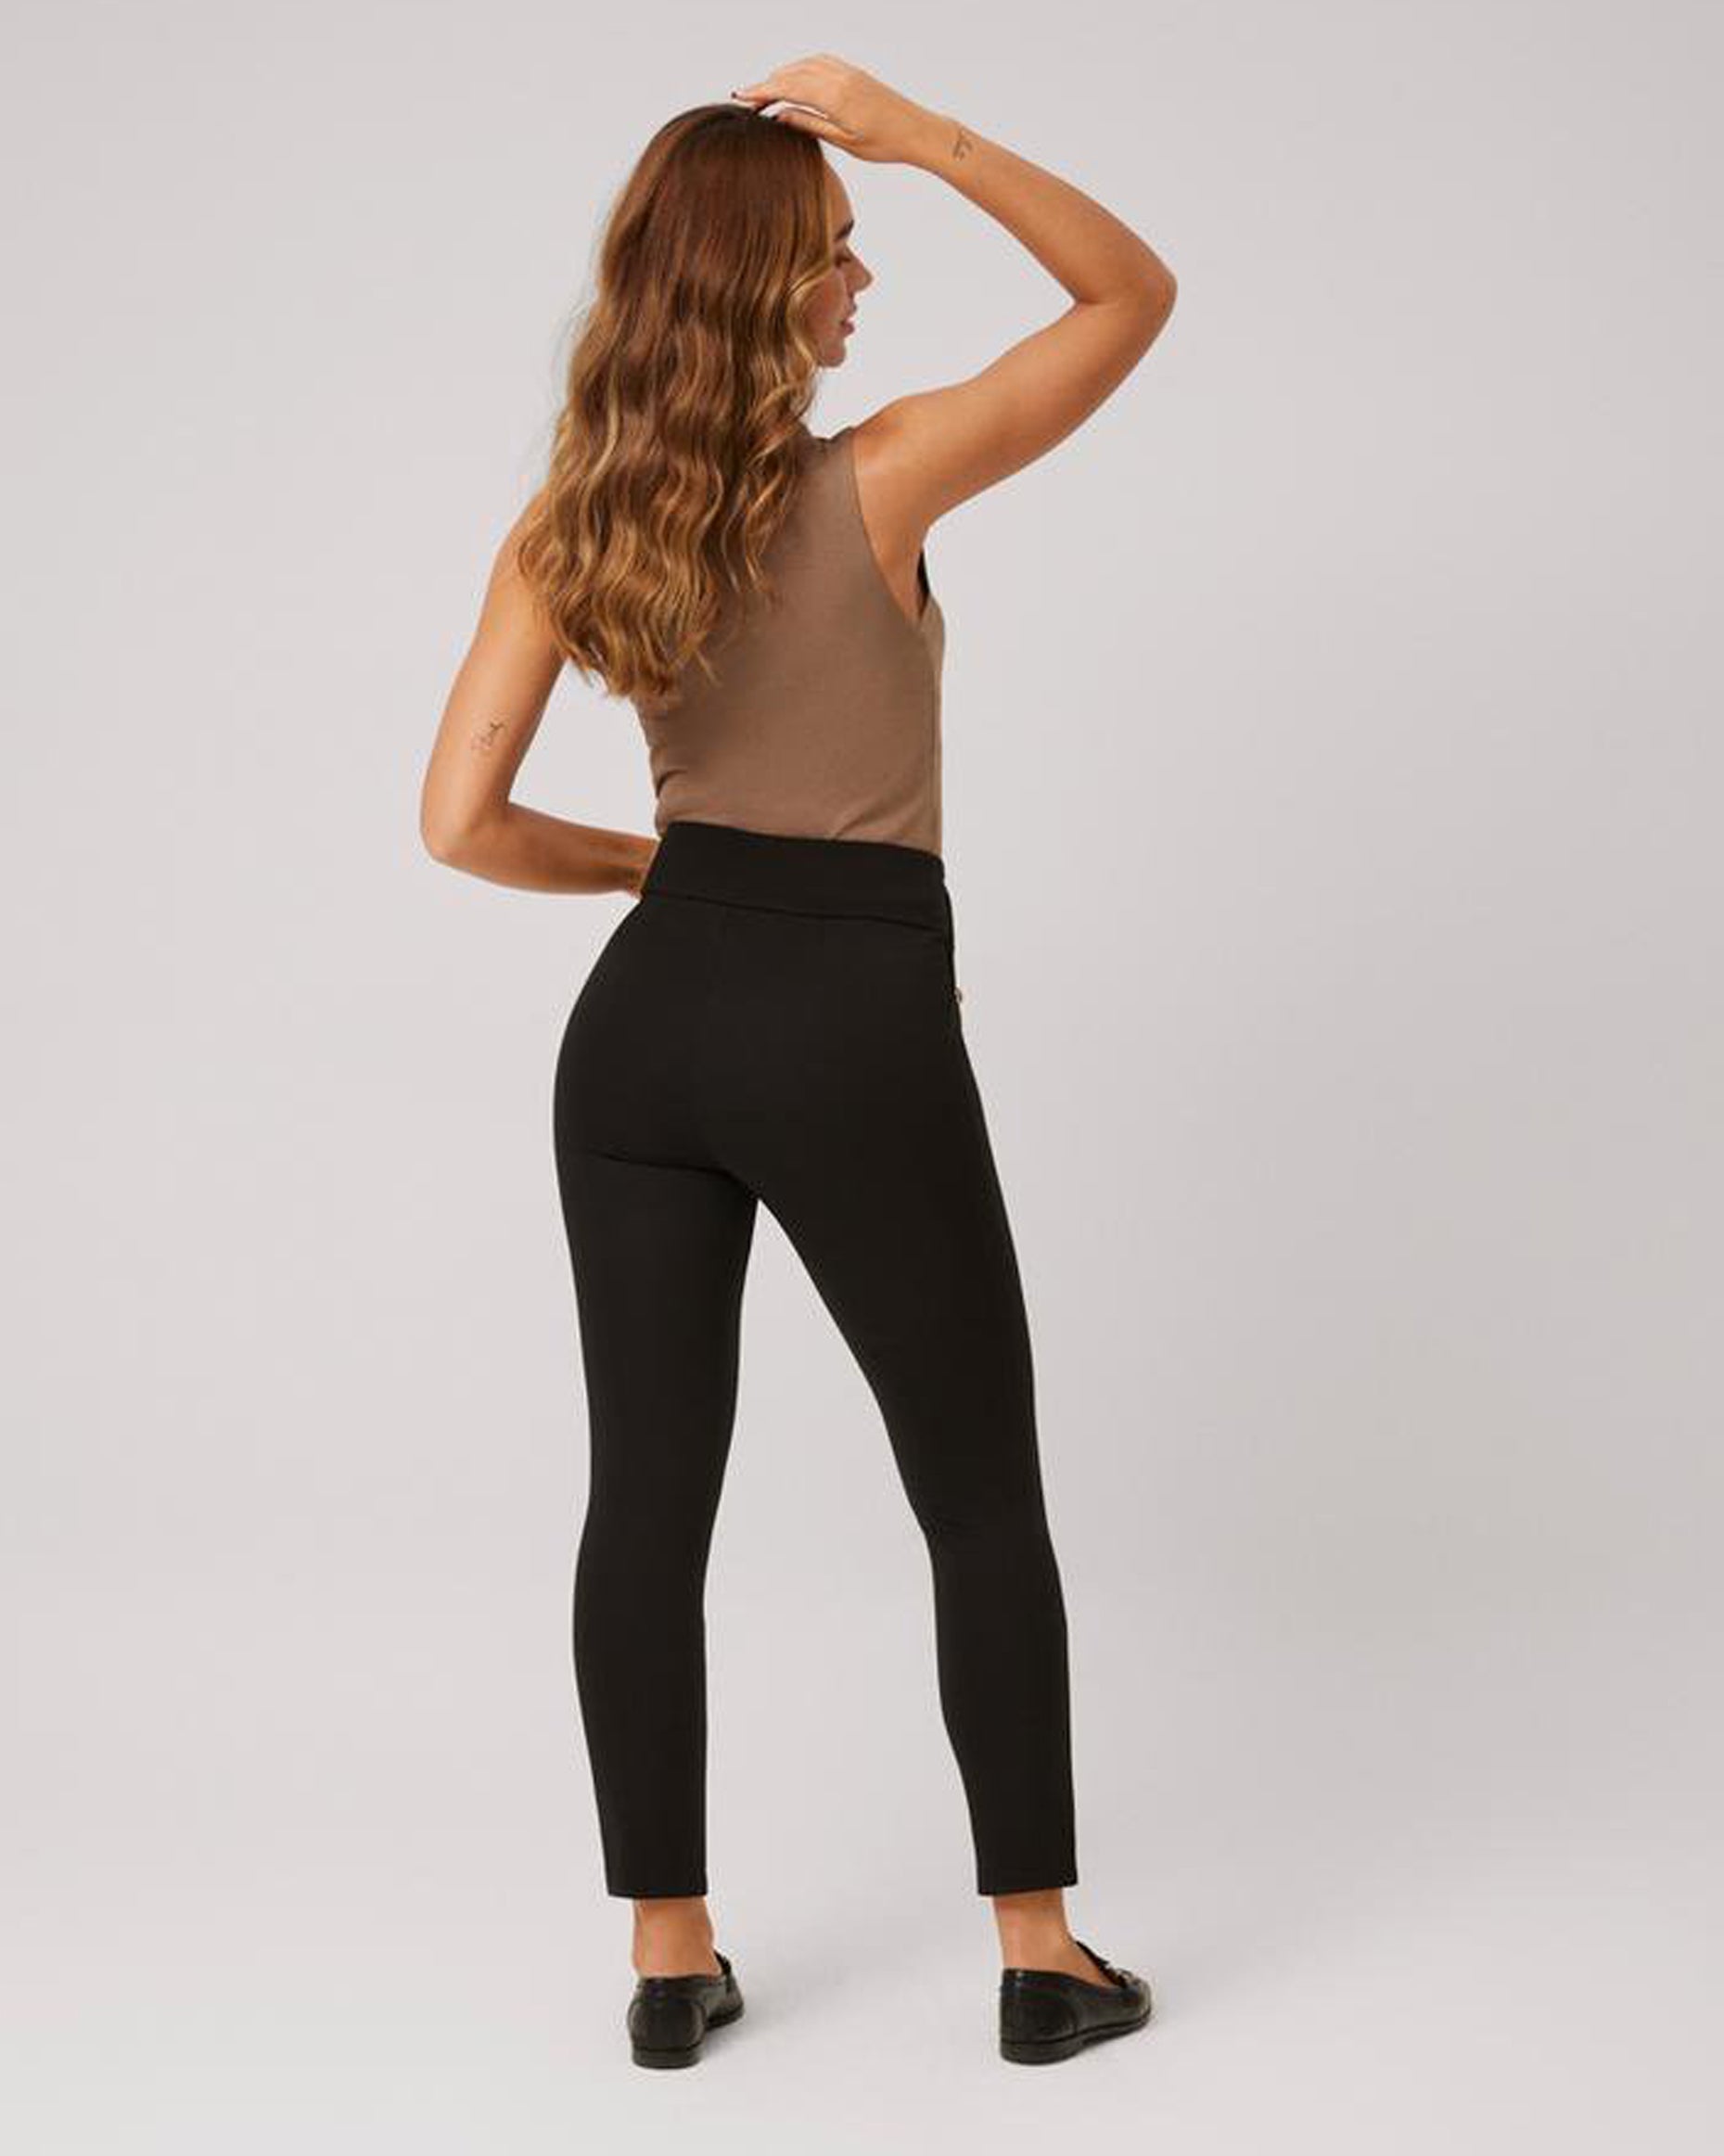 Ysabel Mora 70404 High Rise Button Leggings - Black high waisted suit style trouser leggings with golden buttons on the sides.